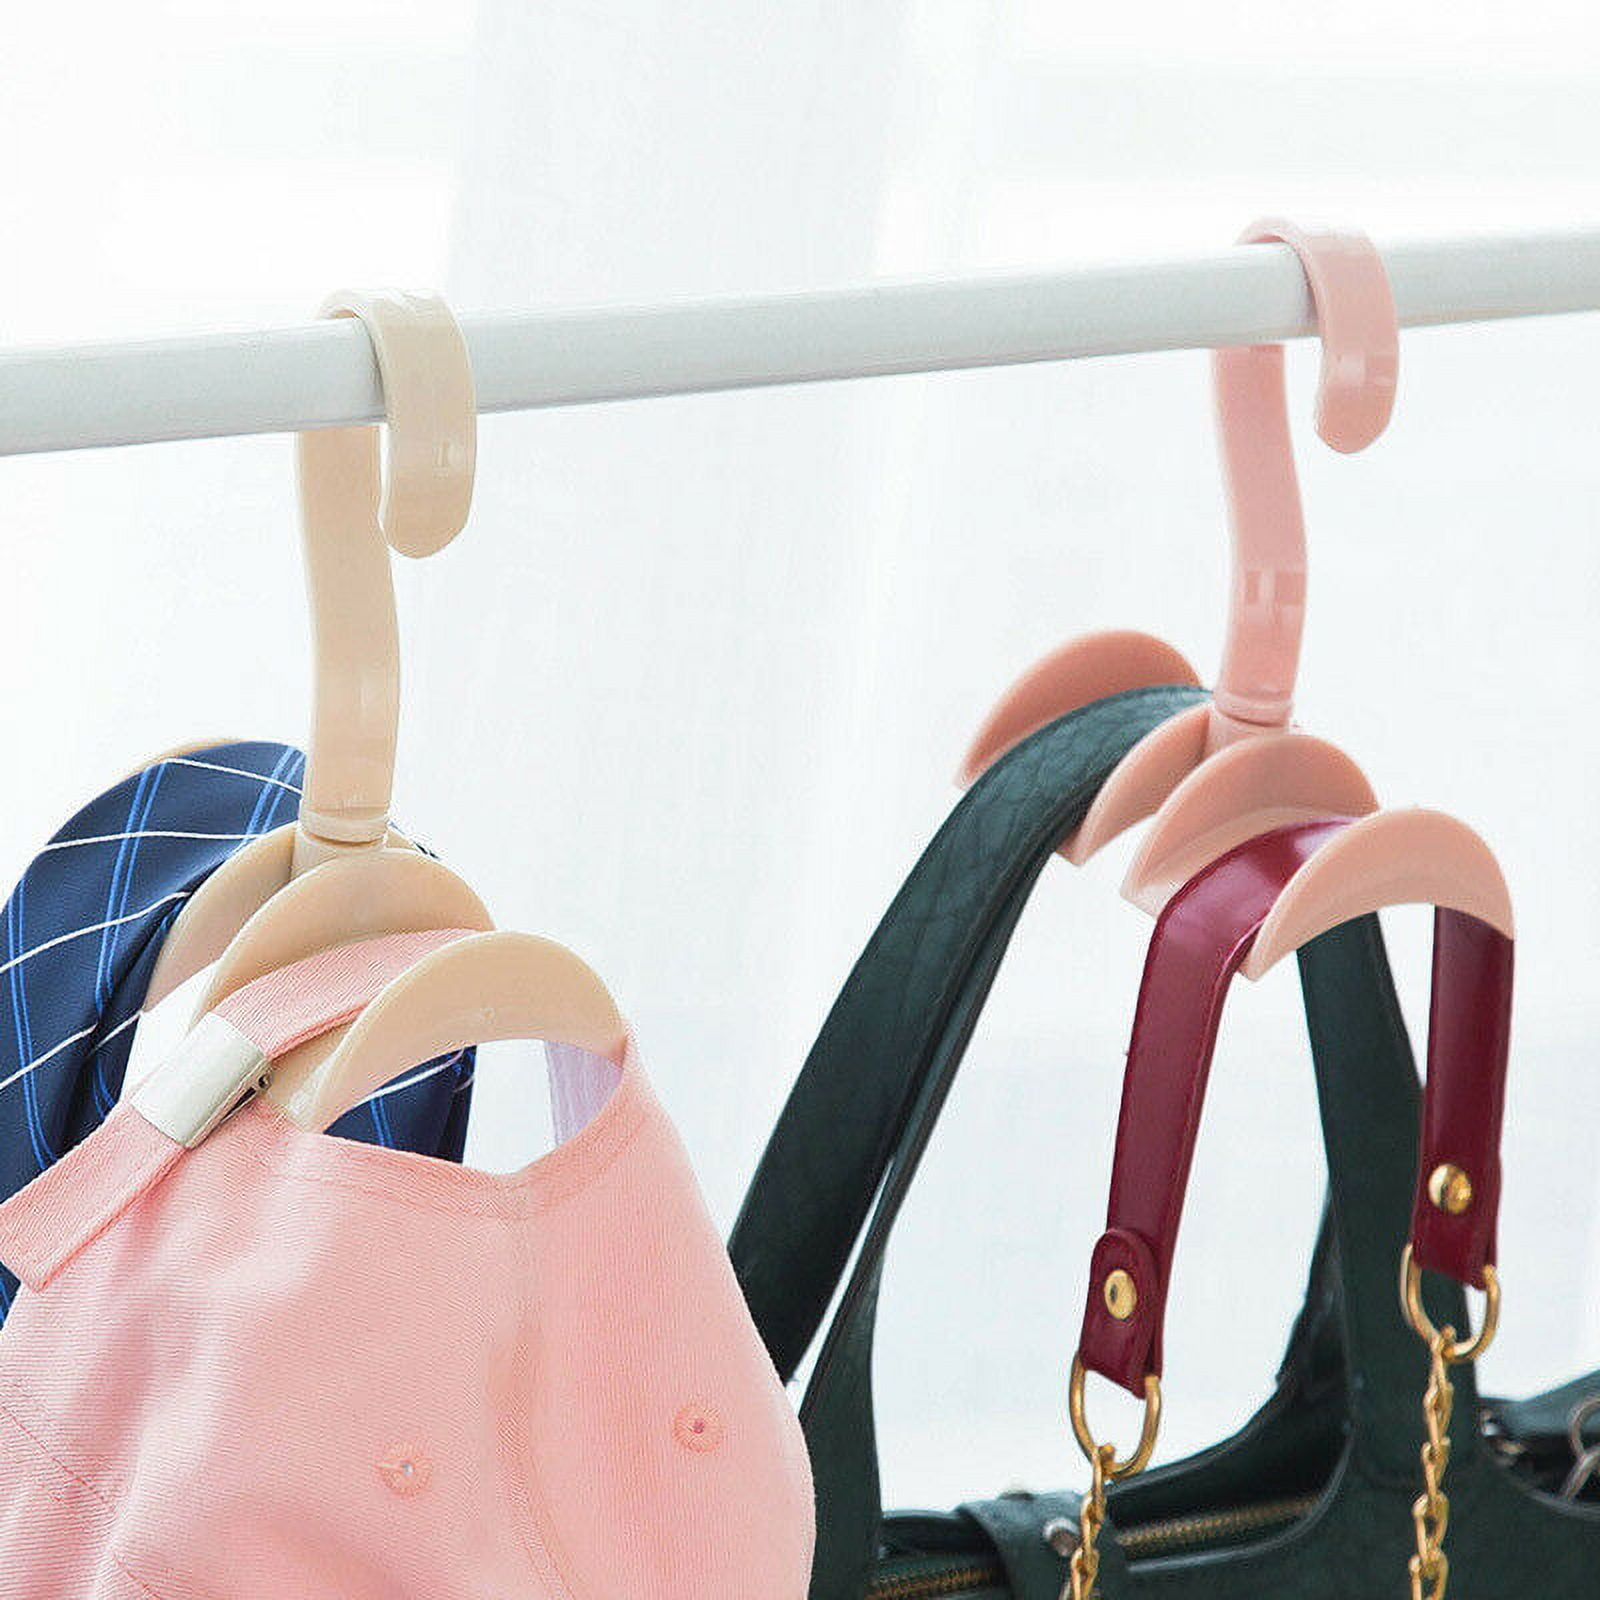 1pc, Space-Saving Purse Hanger for Closet and Organizer for Scarves,  Handbags, Belts, and Backpacks